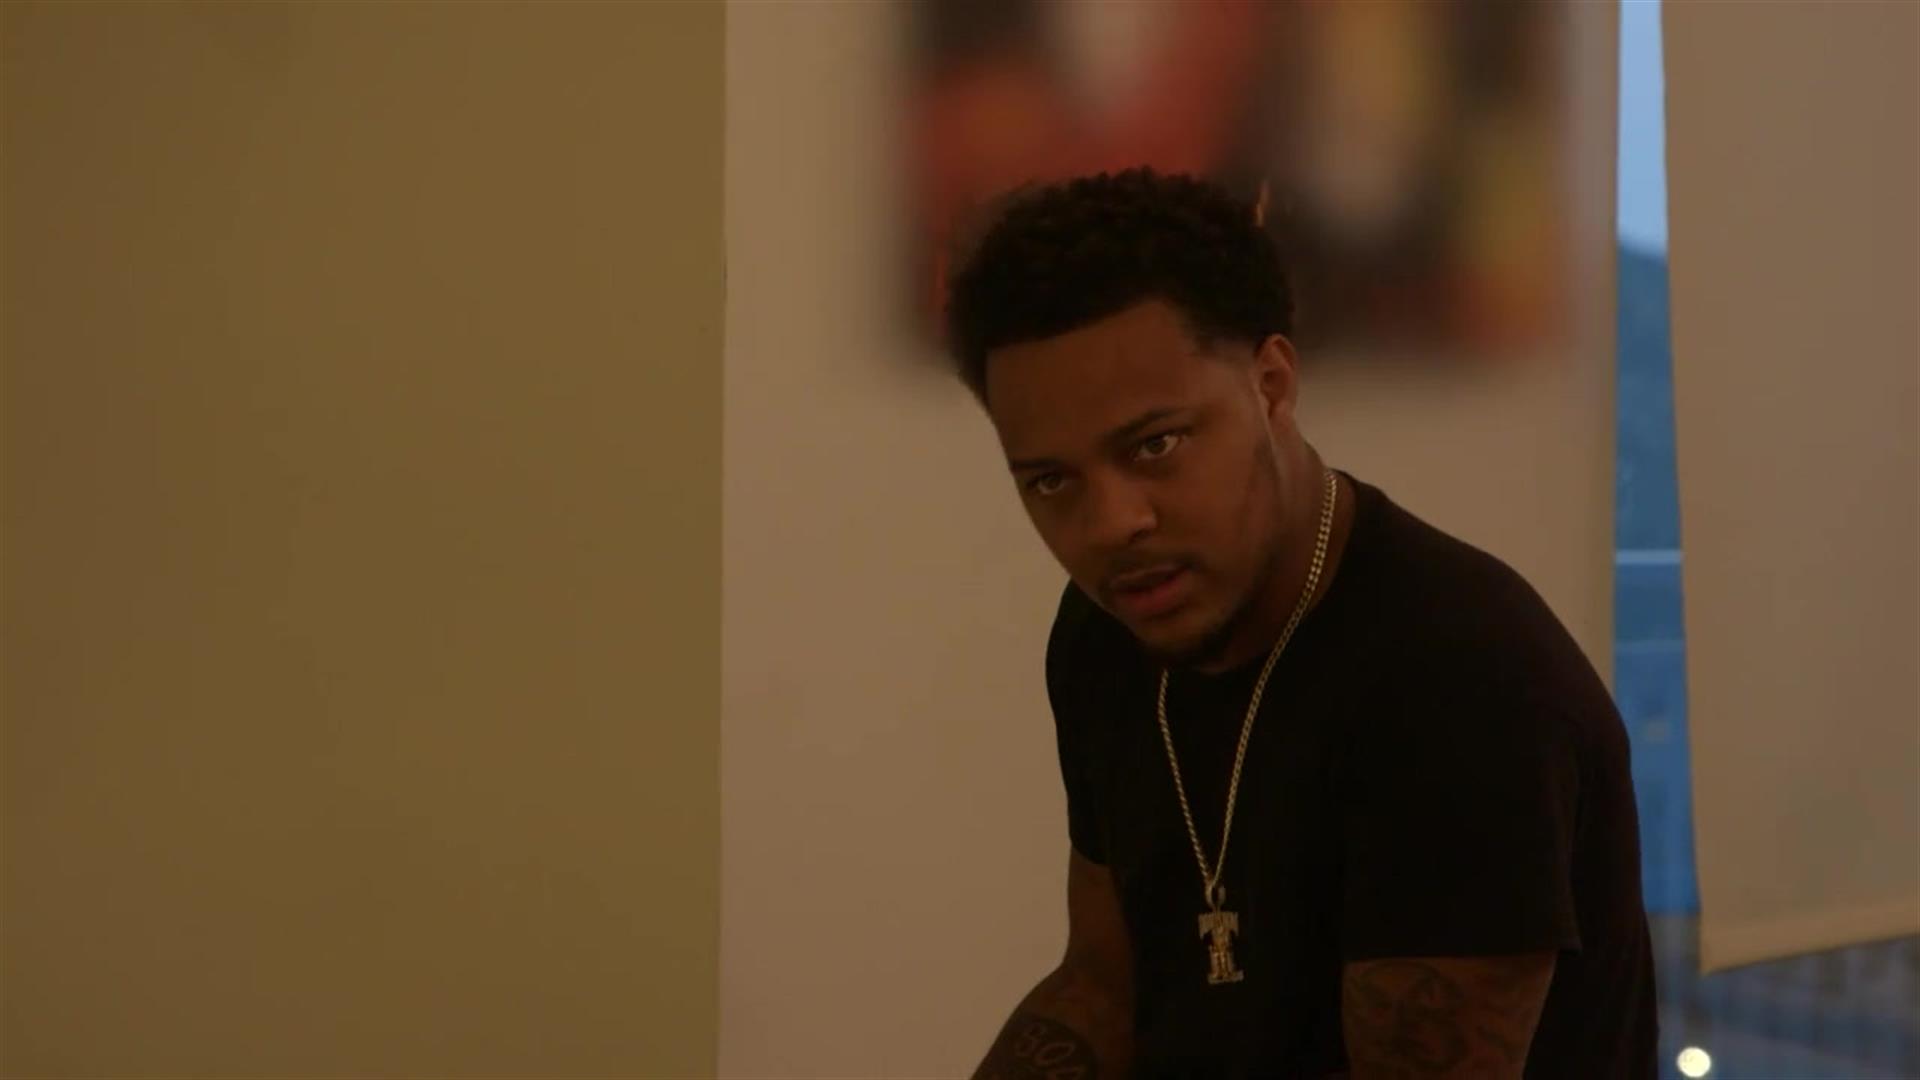 Watch Bow's Not Feeling Deb's Project | Growing Up Hip Hop: Atlanta Video Extras